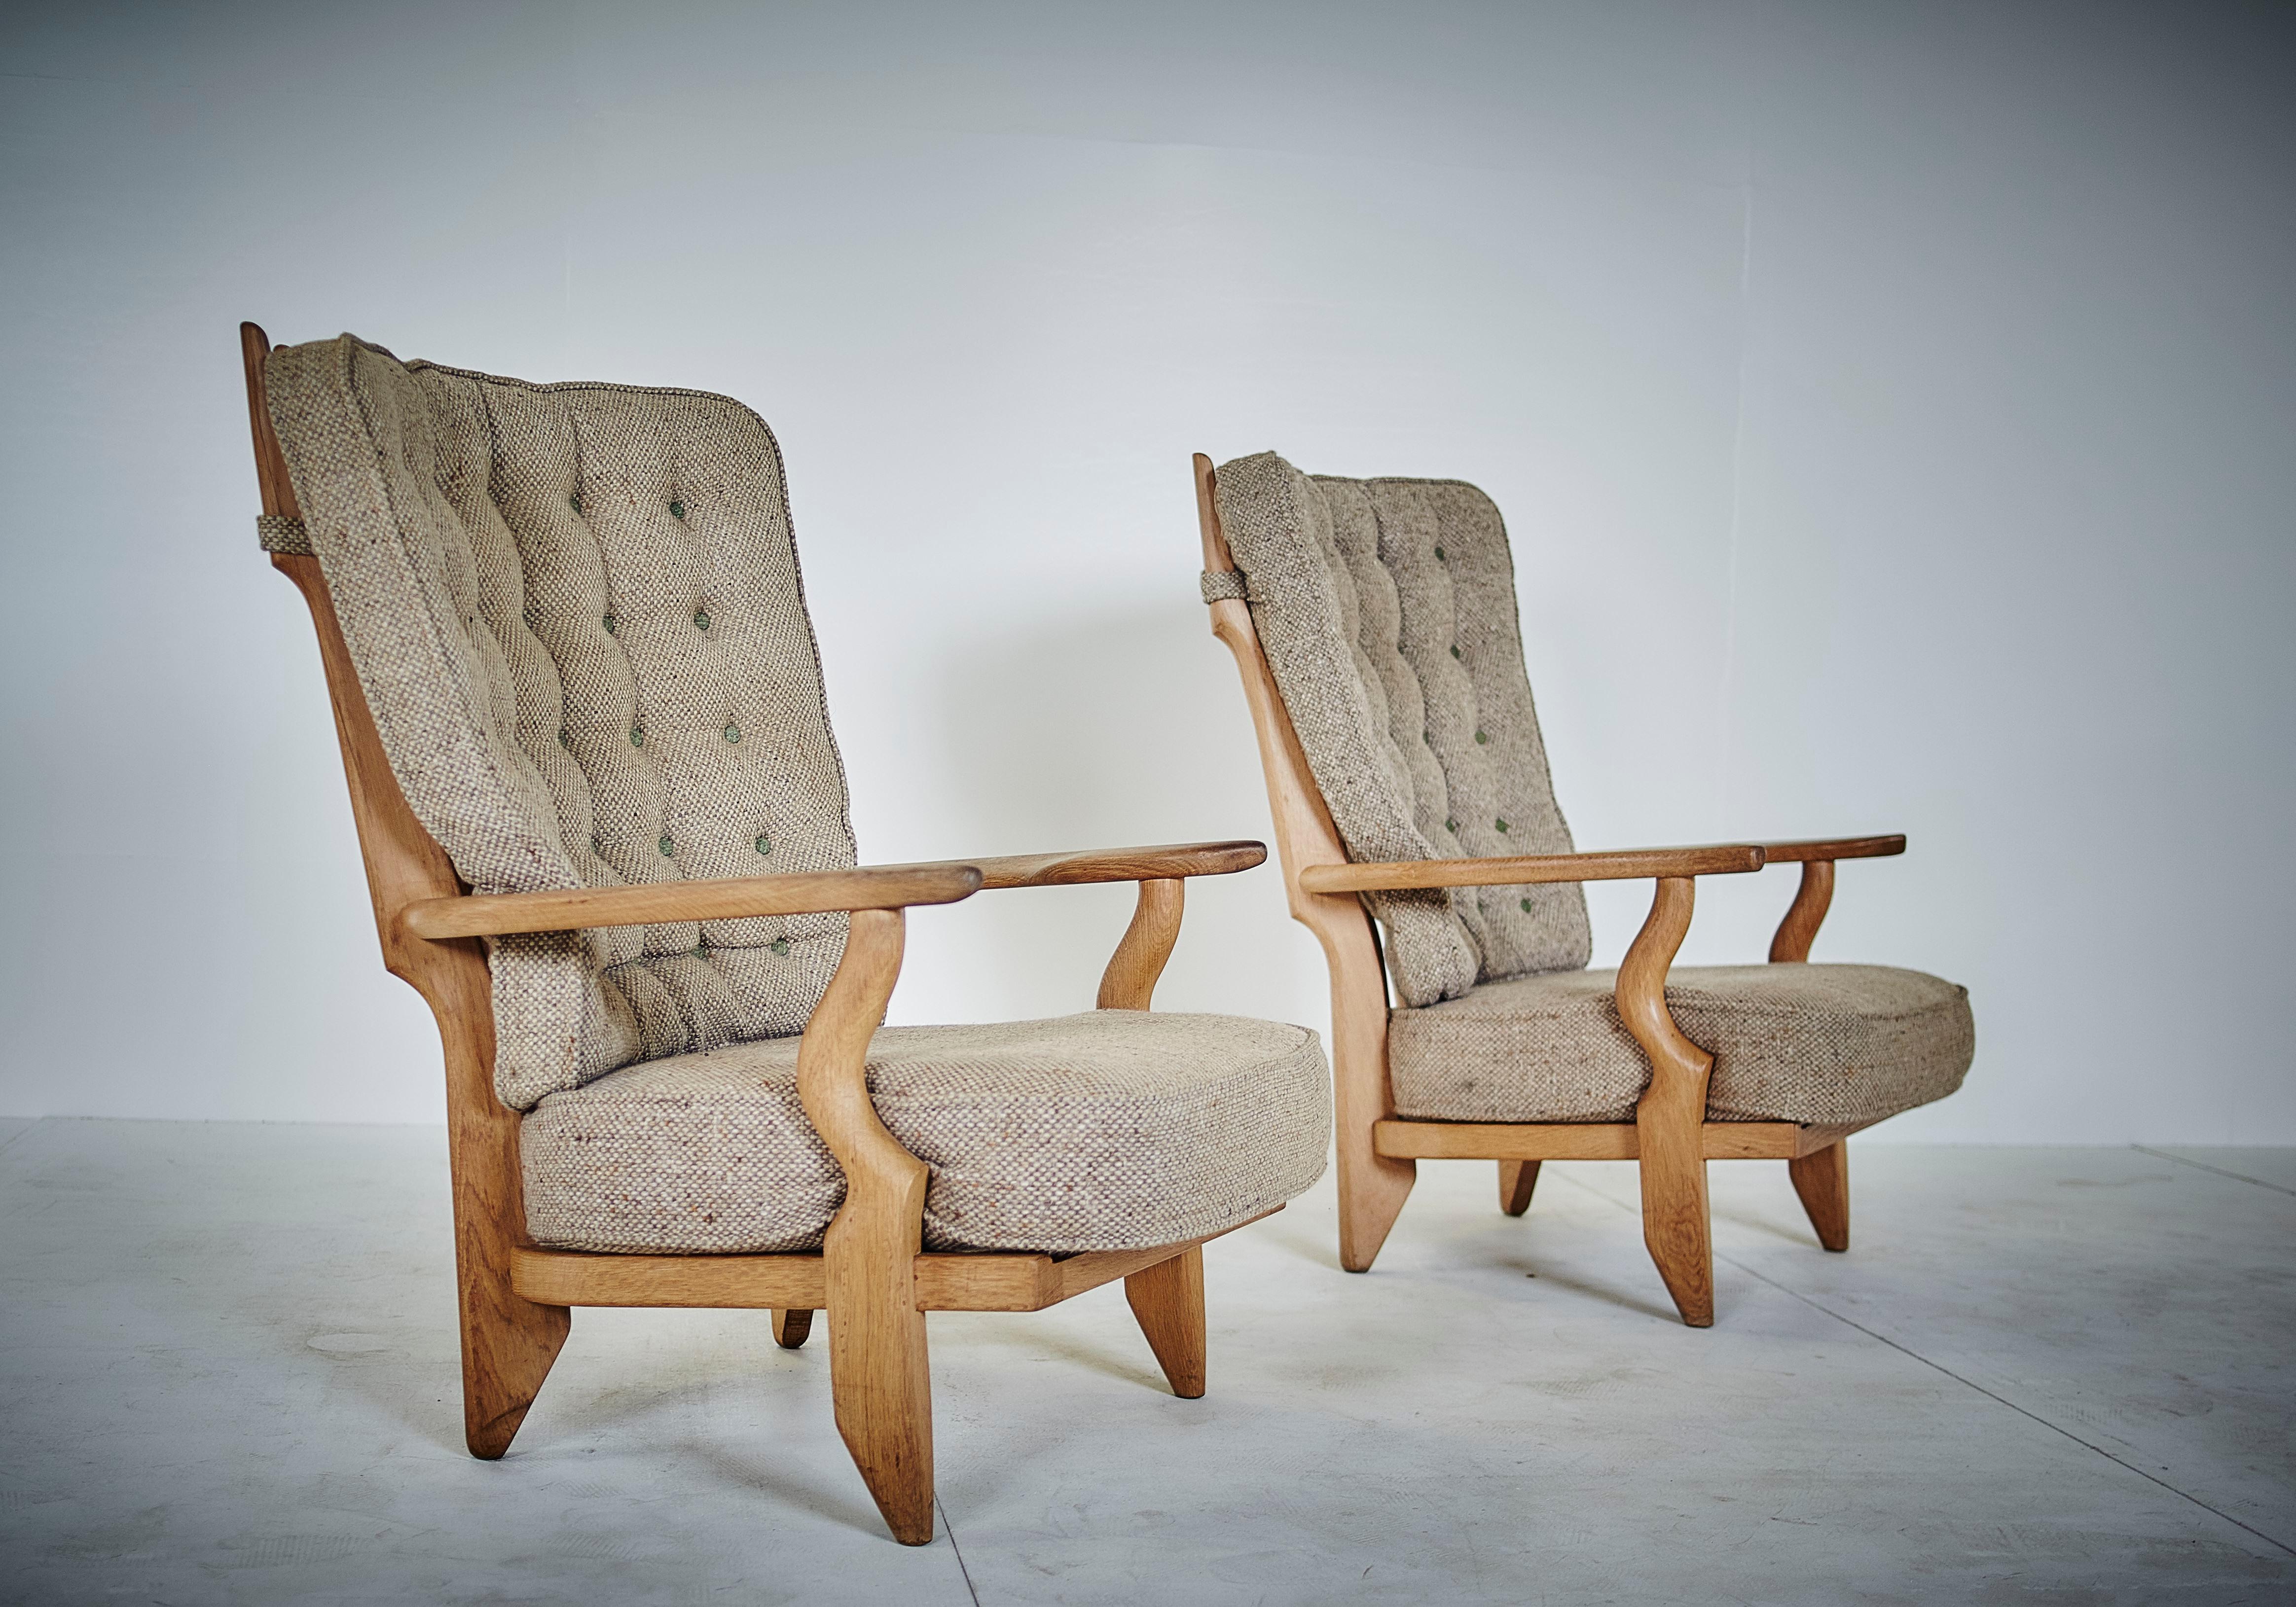 Rare pair of grand repos model by Guillerme et Chambron with original fabric.

The duo is known for their high-quality solid oak furniture.

Robert Guillerme (1913-1990) and Jacques Chambron, (1914-2001).
Their company, Votre Maison, has marked